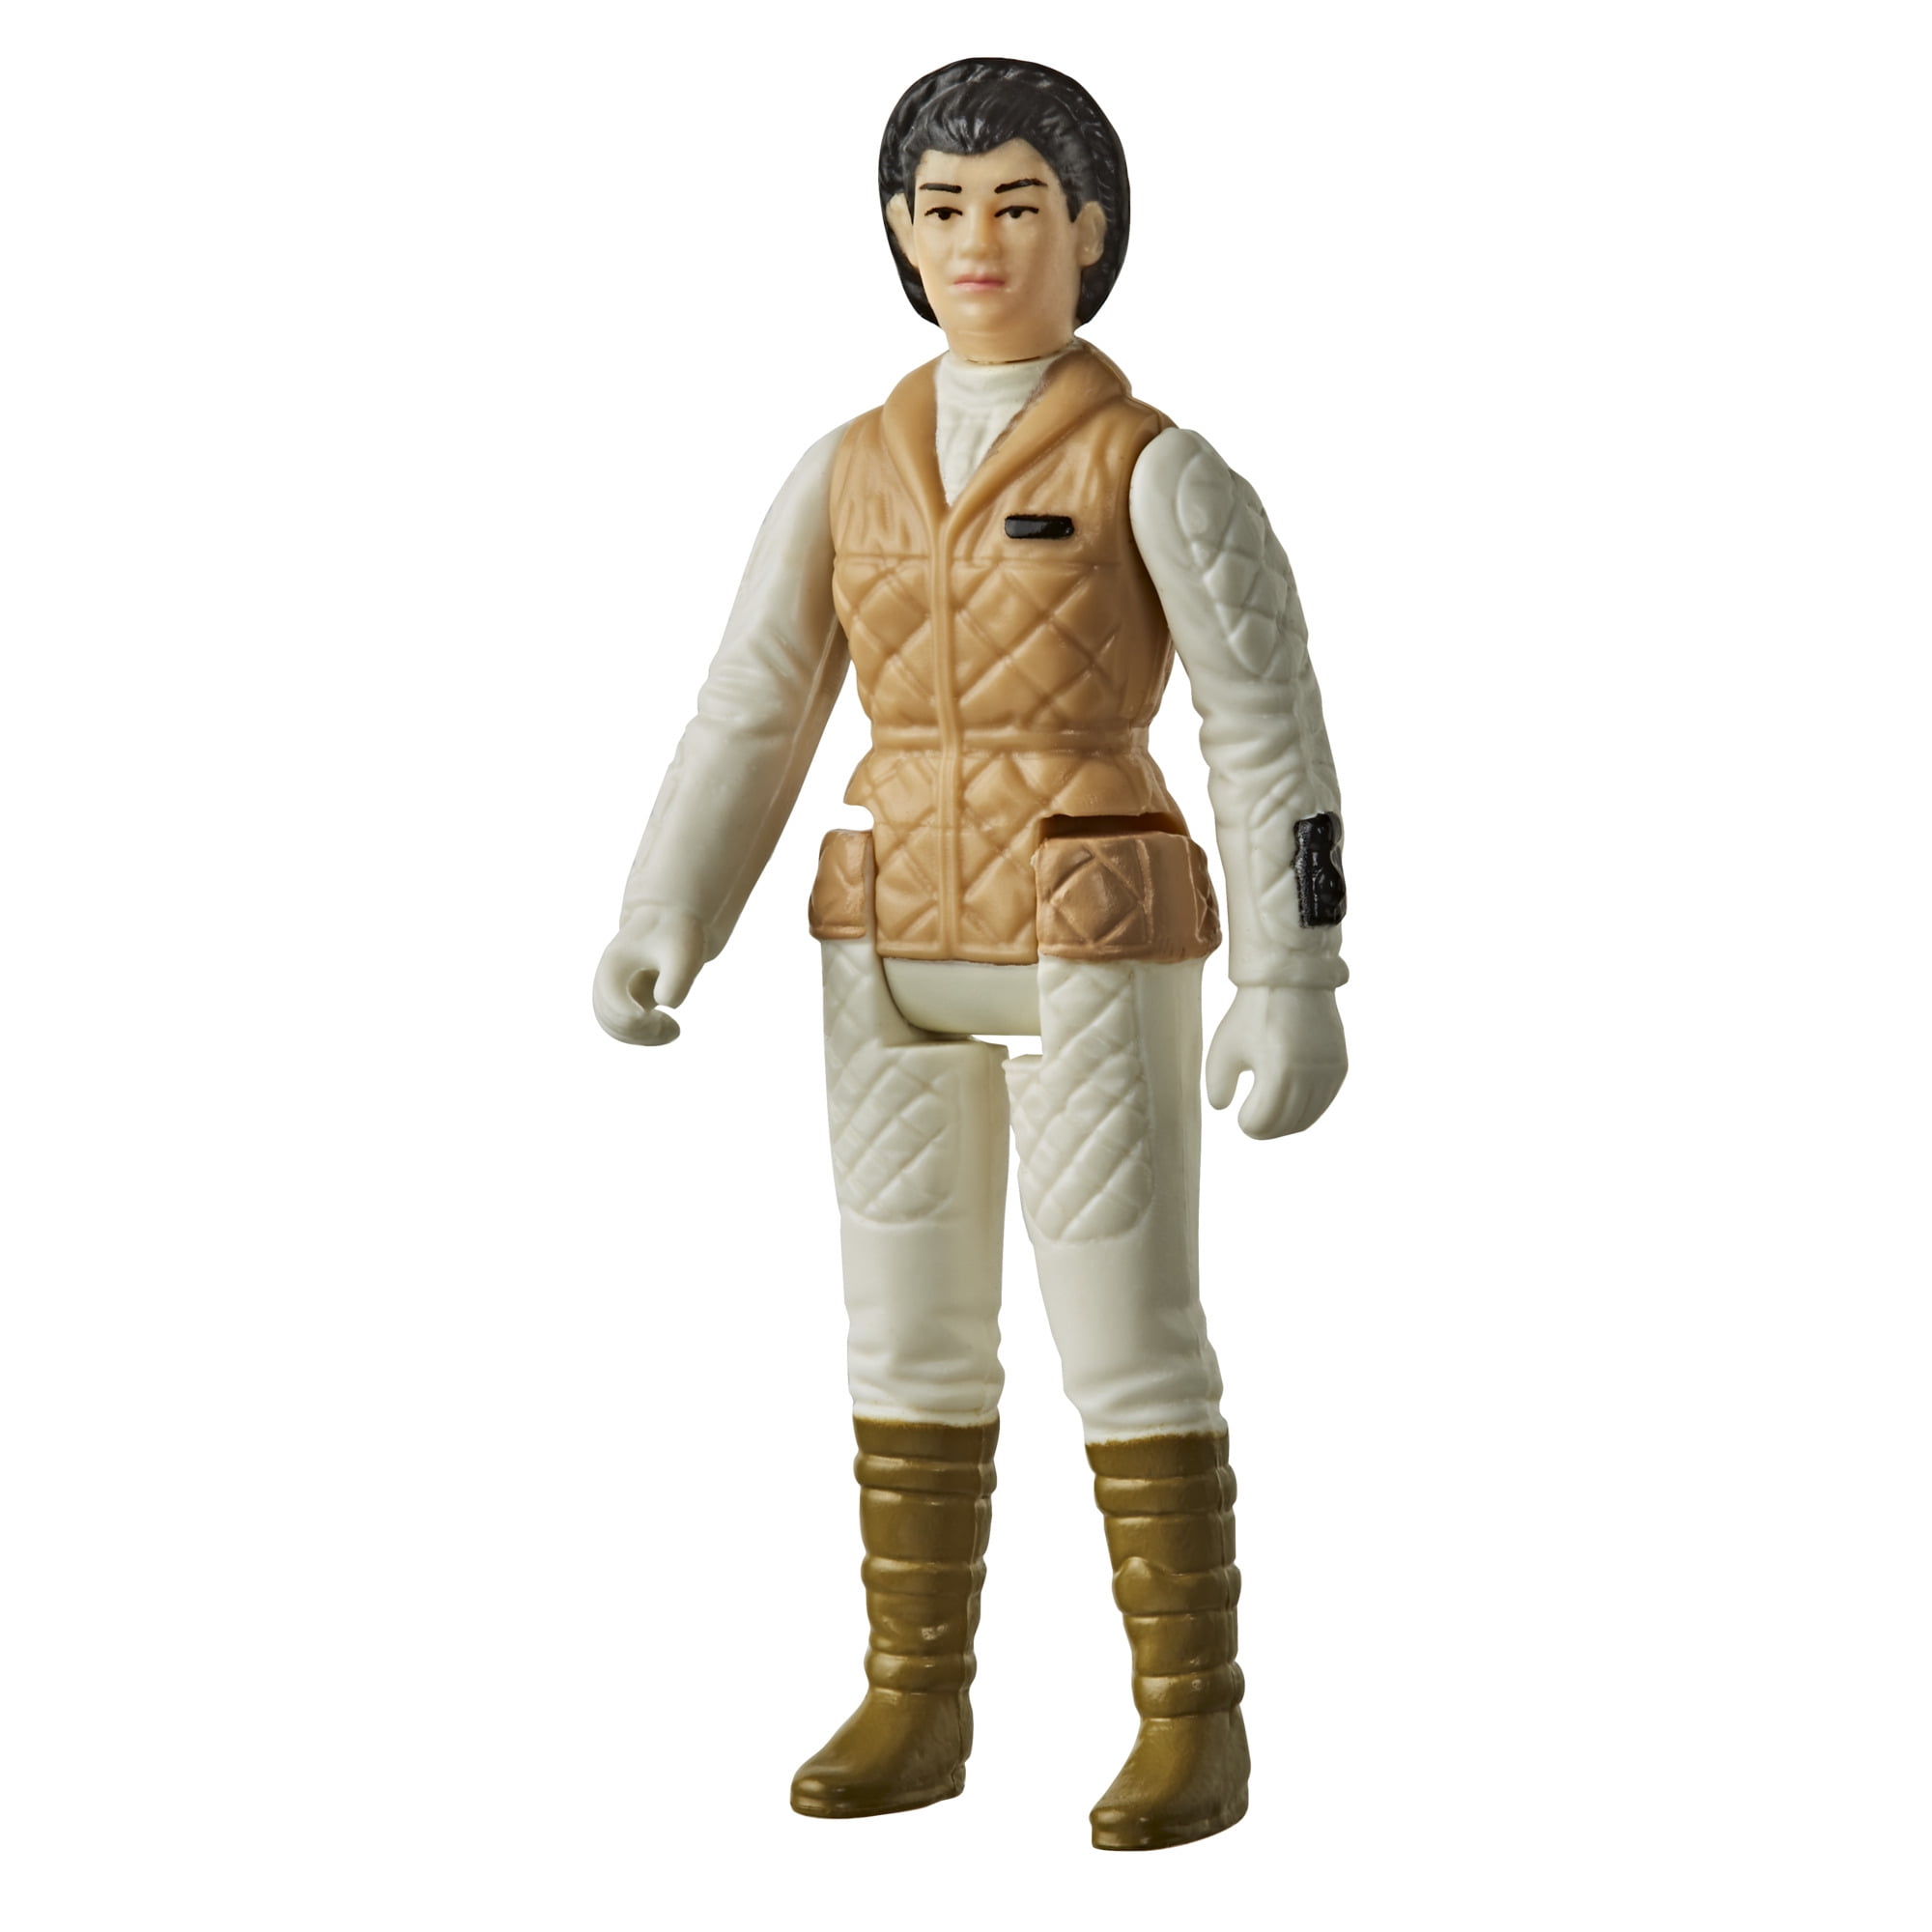 Hoth Details about   Star Wars The Empire Strikes Back Retro Collection Han Solo 3A16 